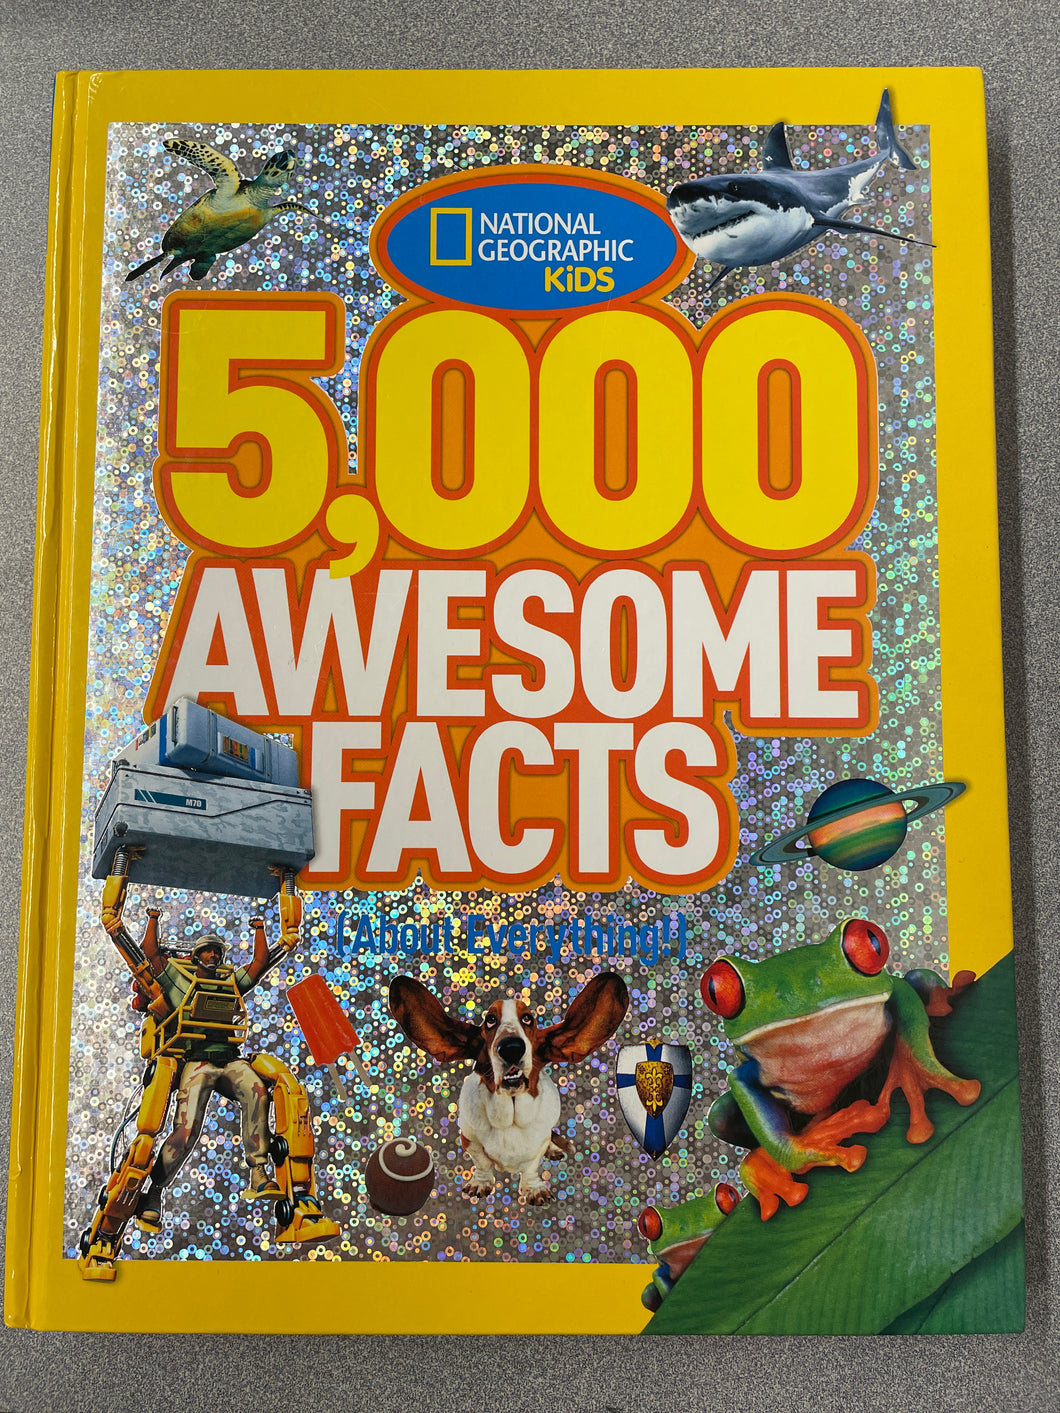 5000 Awesome Facts (About Everything), Baines, Becky, ed., [2012] CN 2/24